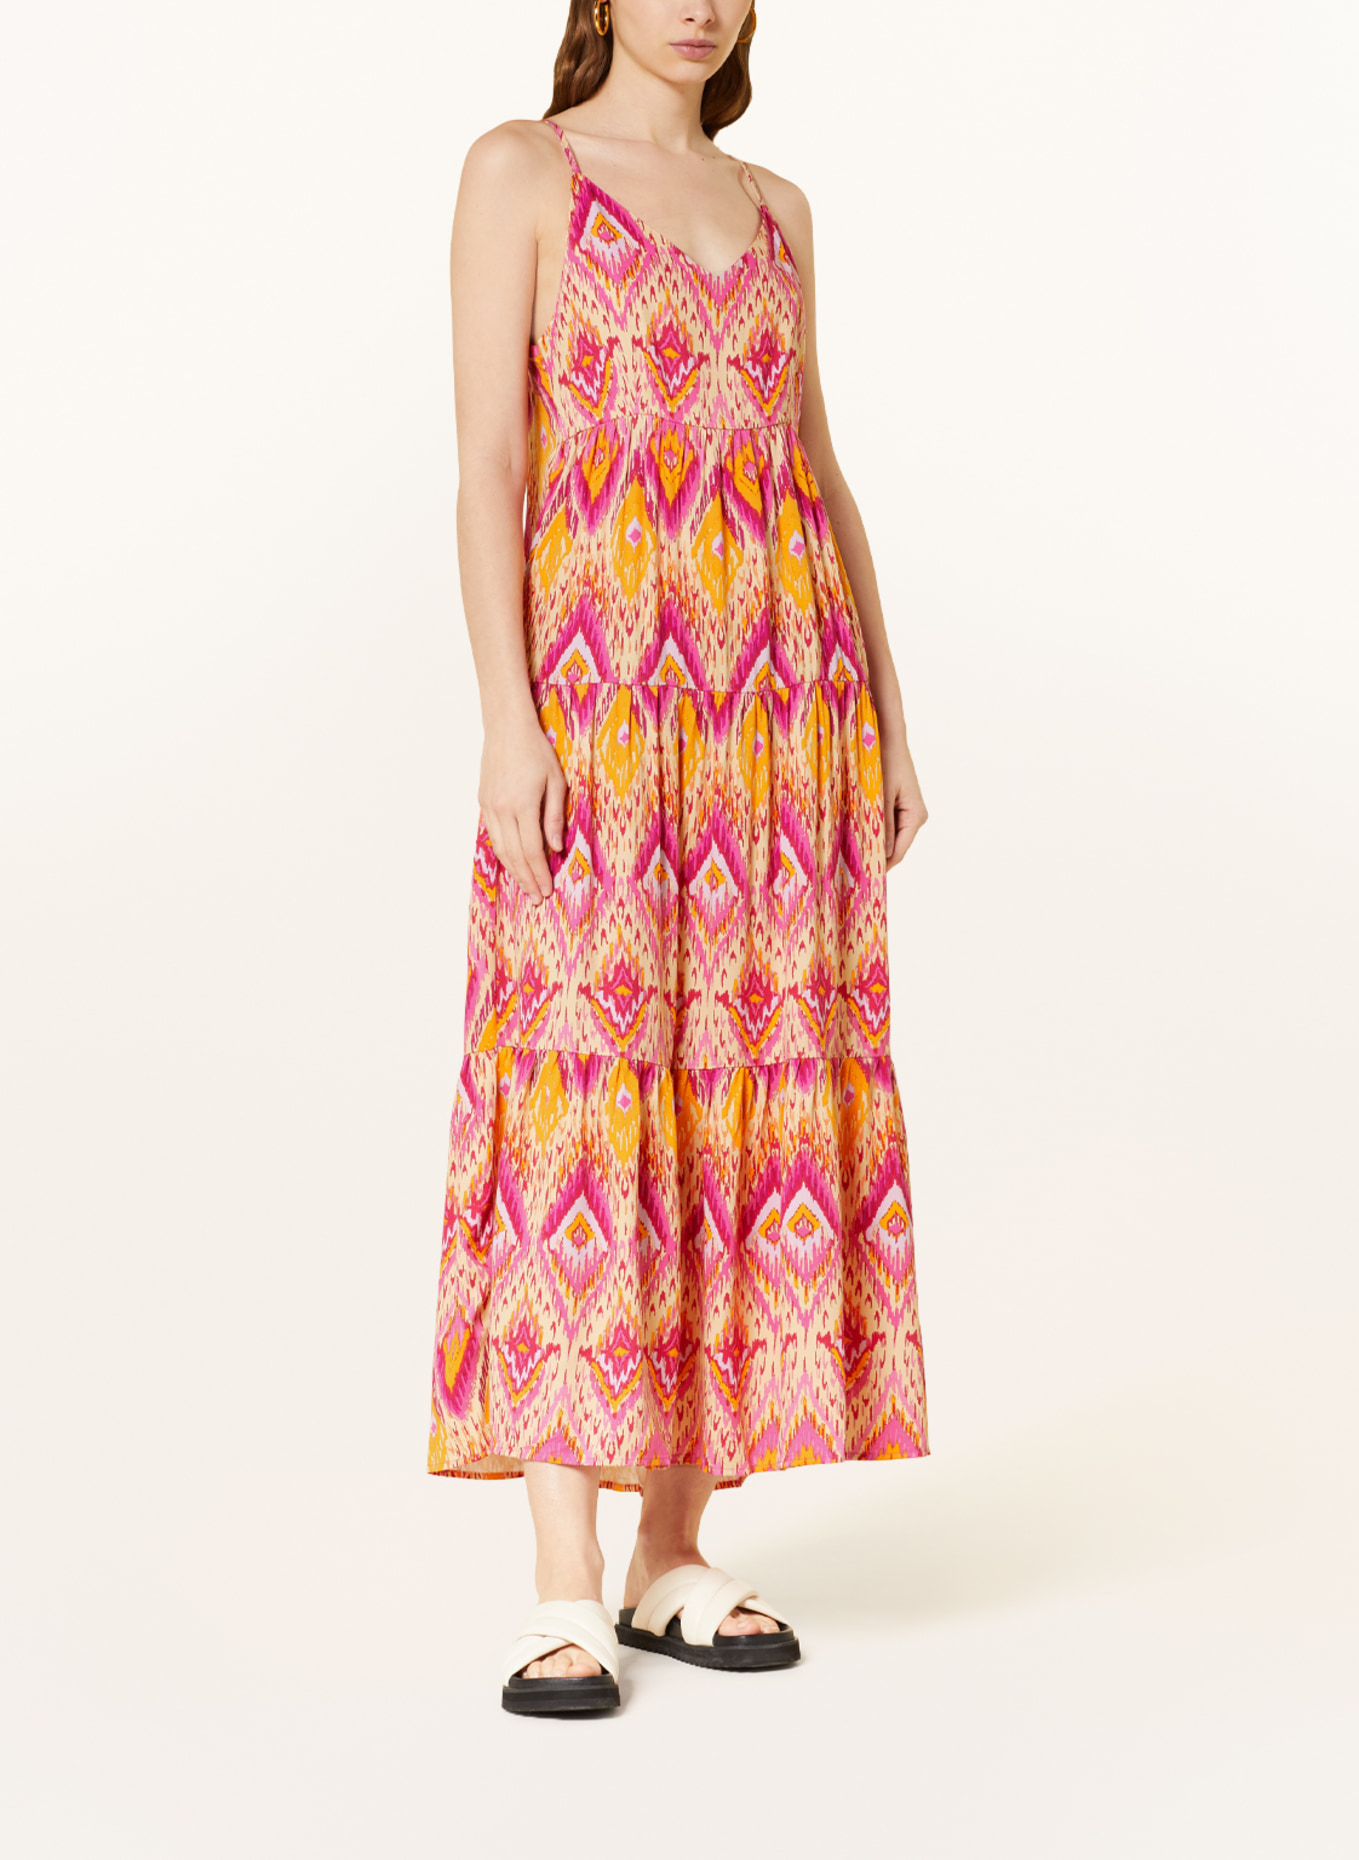 ONLY Dress, Color: ORANGE/ PINK/ LIGHT YELLOW (Image 2)